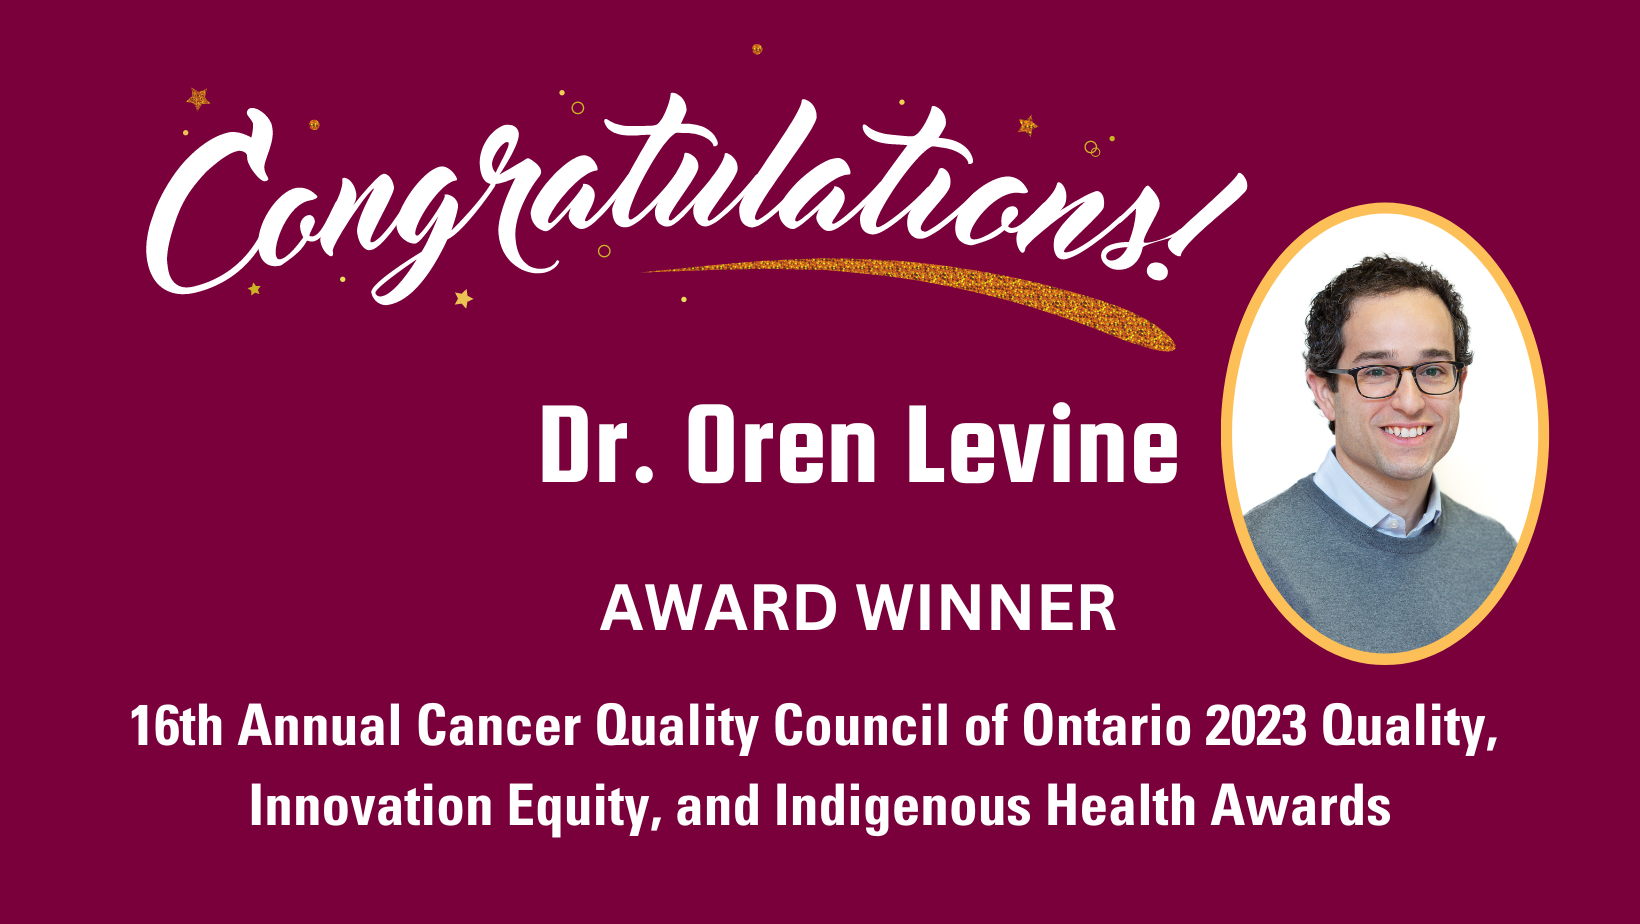 Dr. Oren Levine Won 16th Annual Cancer Quality Council of Ontario 2023 Quality, Innovation Equity, and Indigenous Health Awards